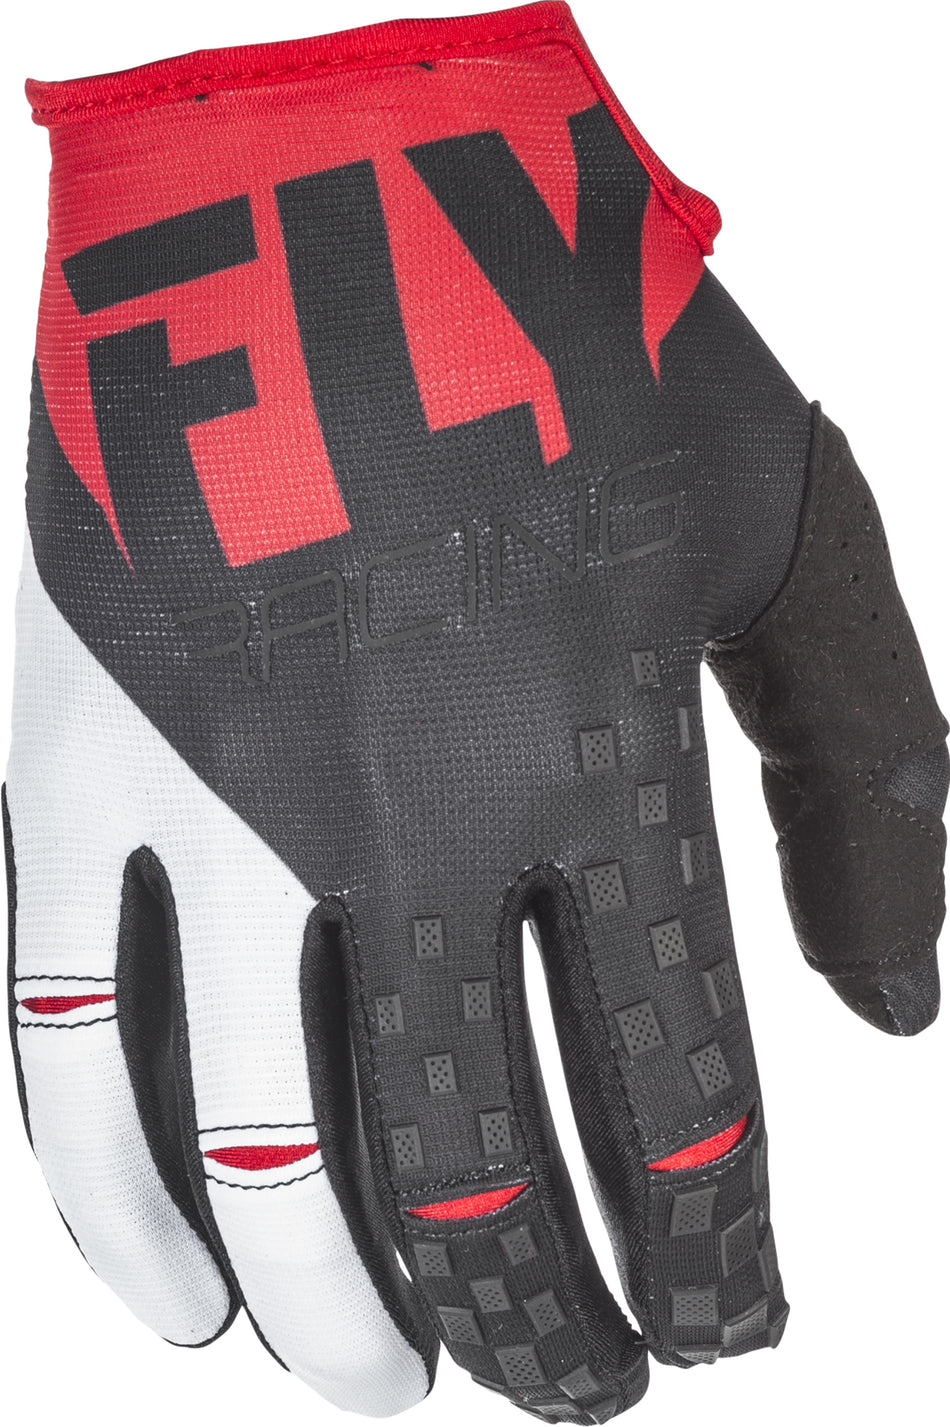 FLY RACING Kinetic Gloves Red/Black Sz 12 371-41212